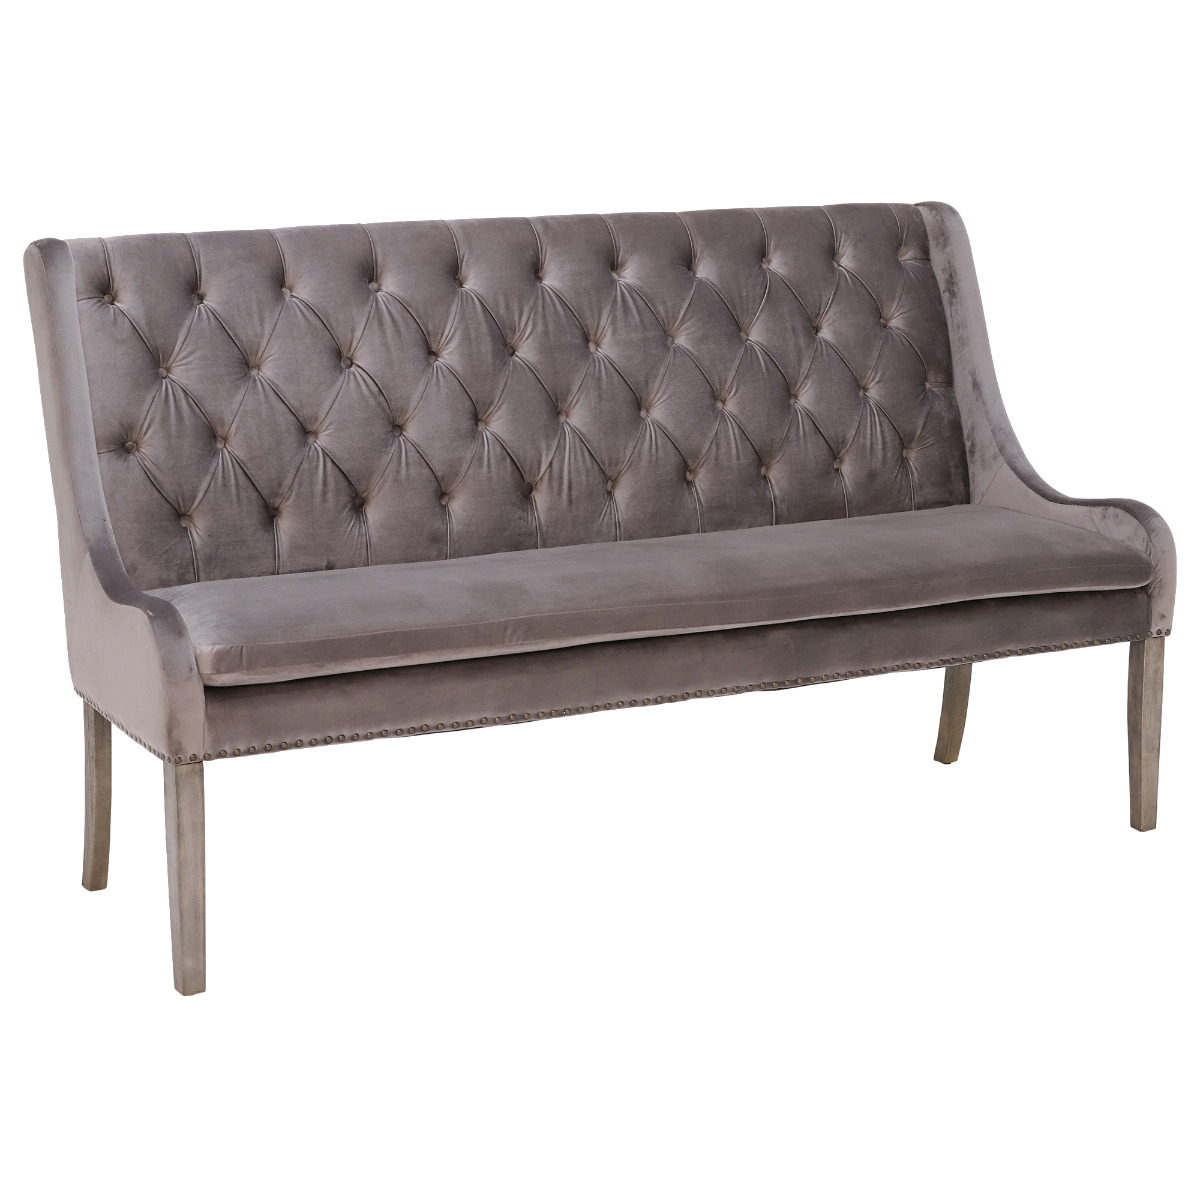 Ophelia Buttoned Back Bench 160cm, Grey | Barker & Stonehouse